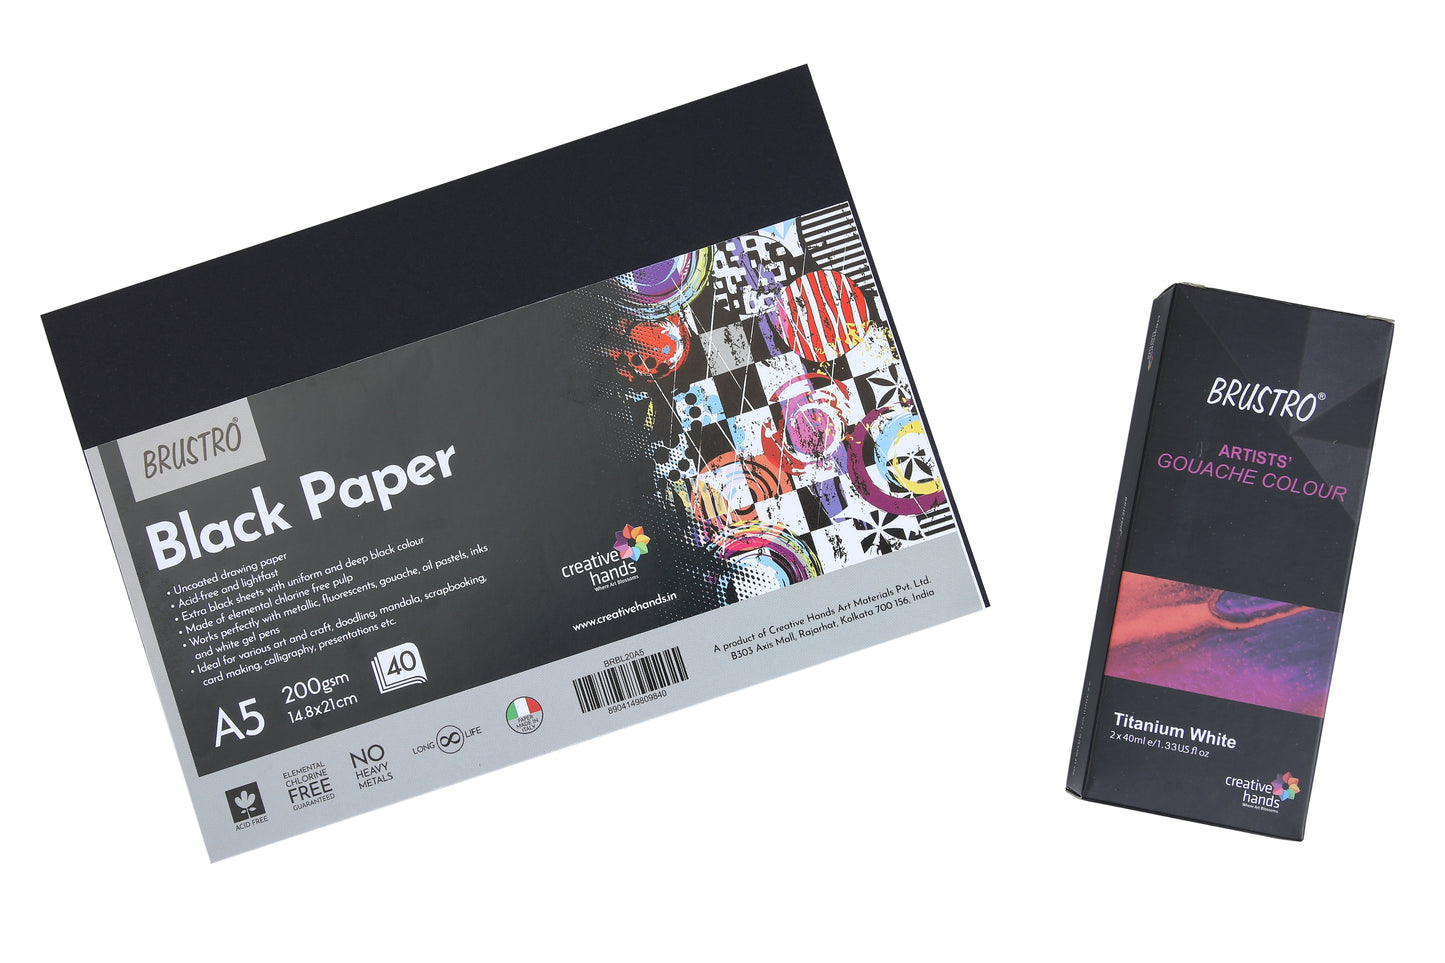 Brustro Gouache Titanium White Twin Pack 40ml Each, with Black Paper A5 40 Sheets